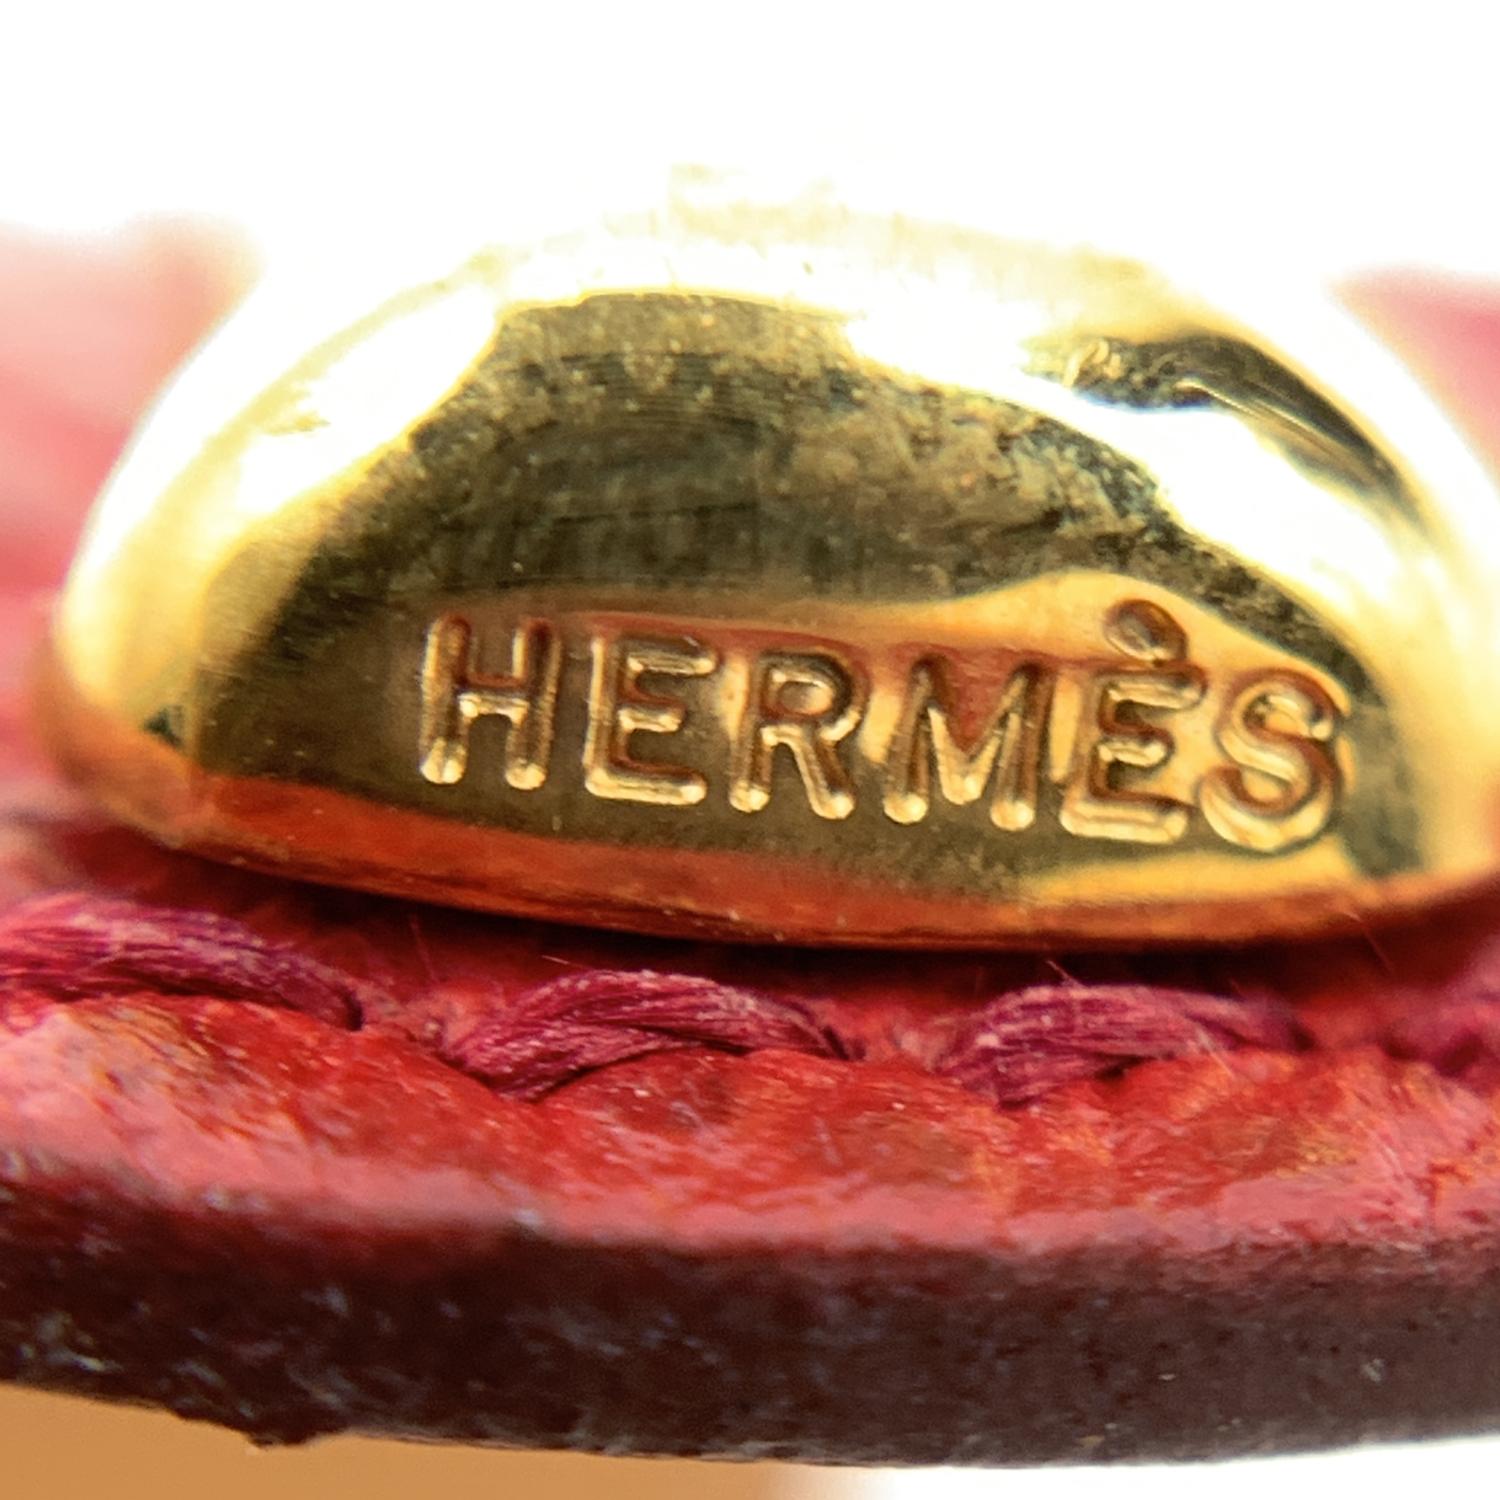 Beautiful Hermes 'Agatha' bracelet. Red leather with a bamboo motif gold metal . The leather bracelet is removable and the metal structure can be worn as a bracelet in its own right. 'Hermes Paris - Made in France' embossed internally. 'Hermes'